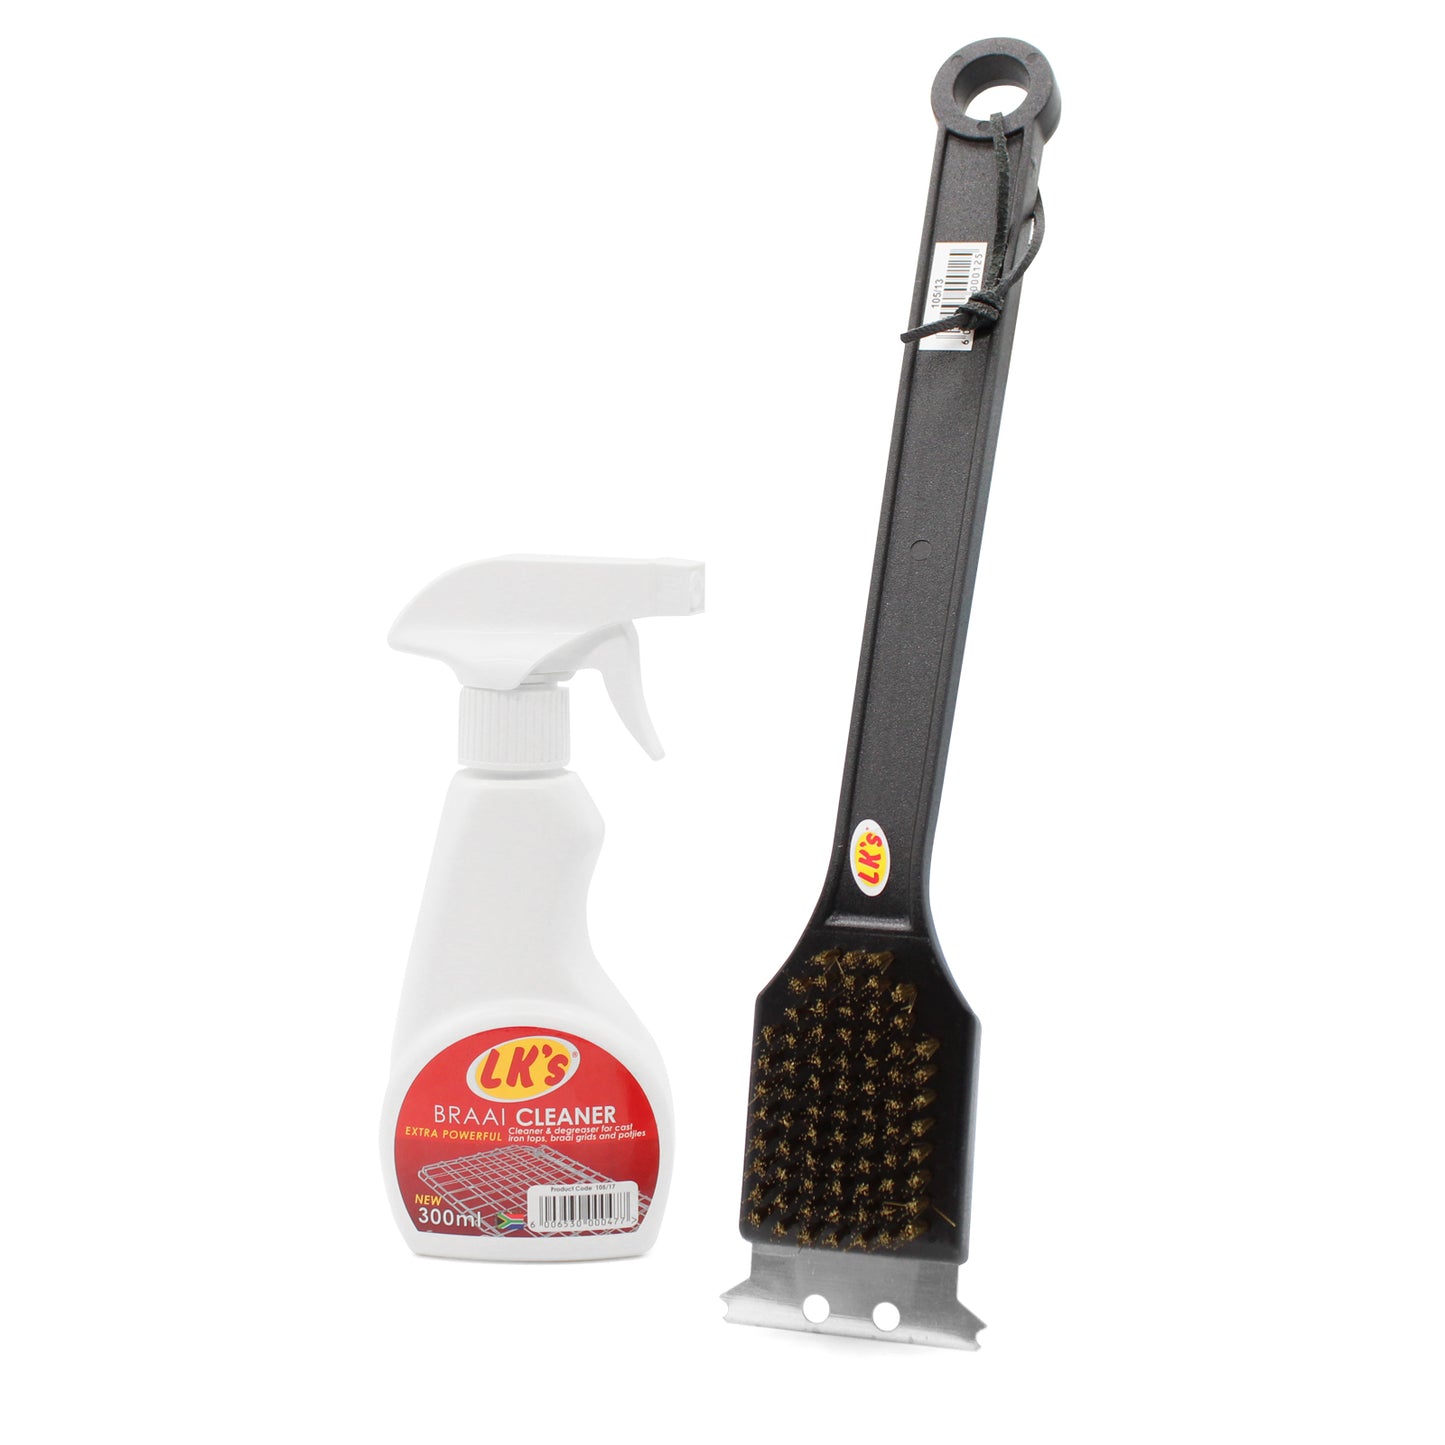 Braai Cleaning Spray and Grid Cleaning Brush